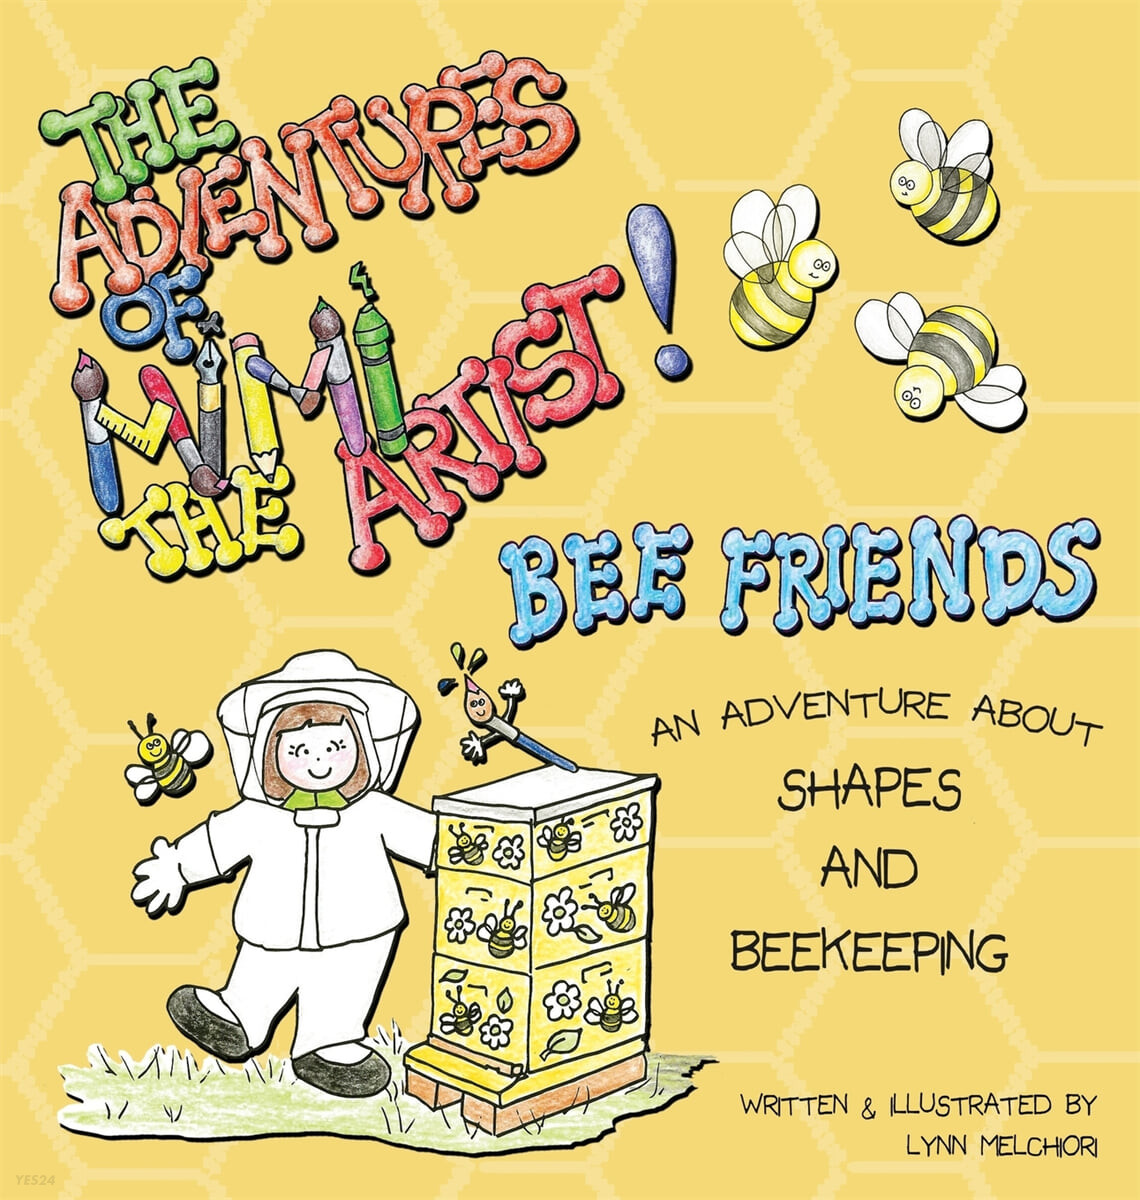 The Adventures of Mimi the Artist (Bee Friends)